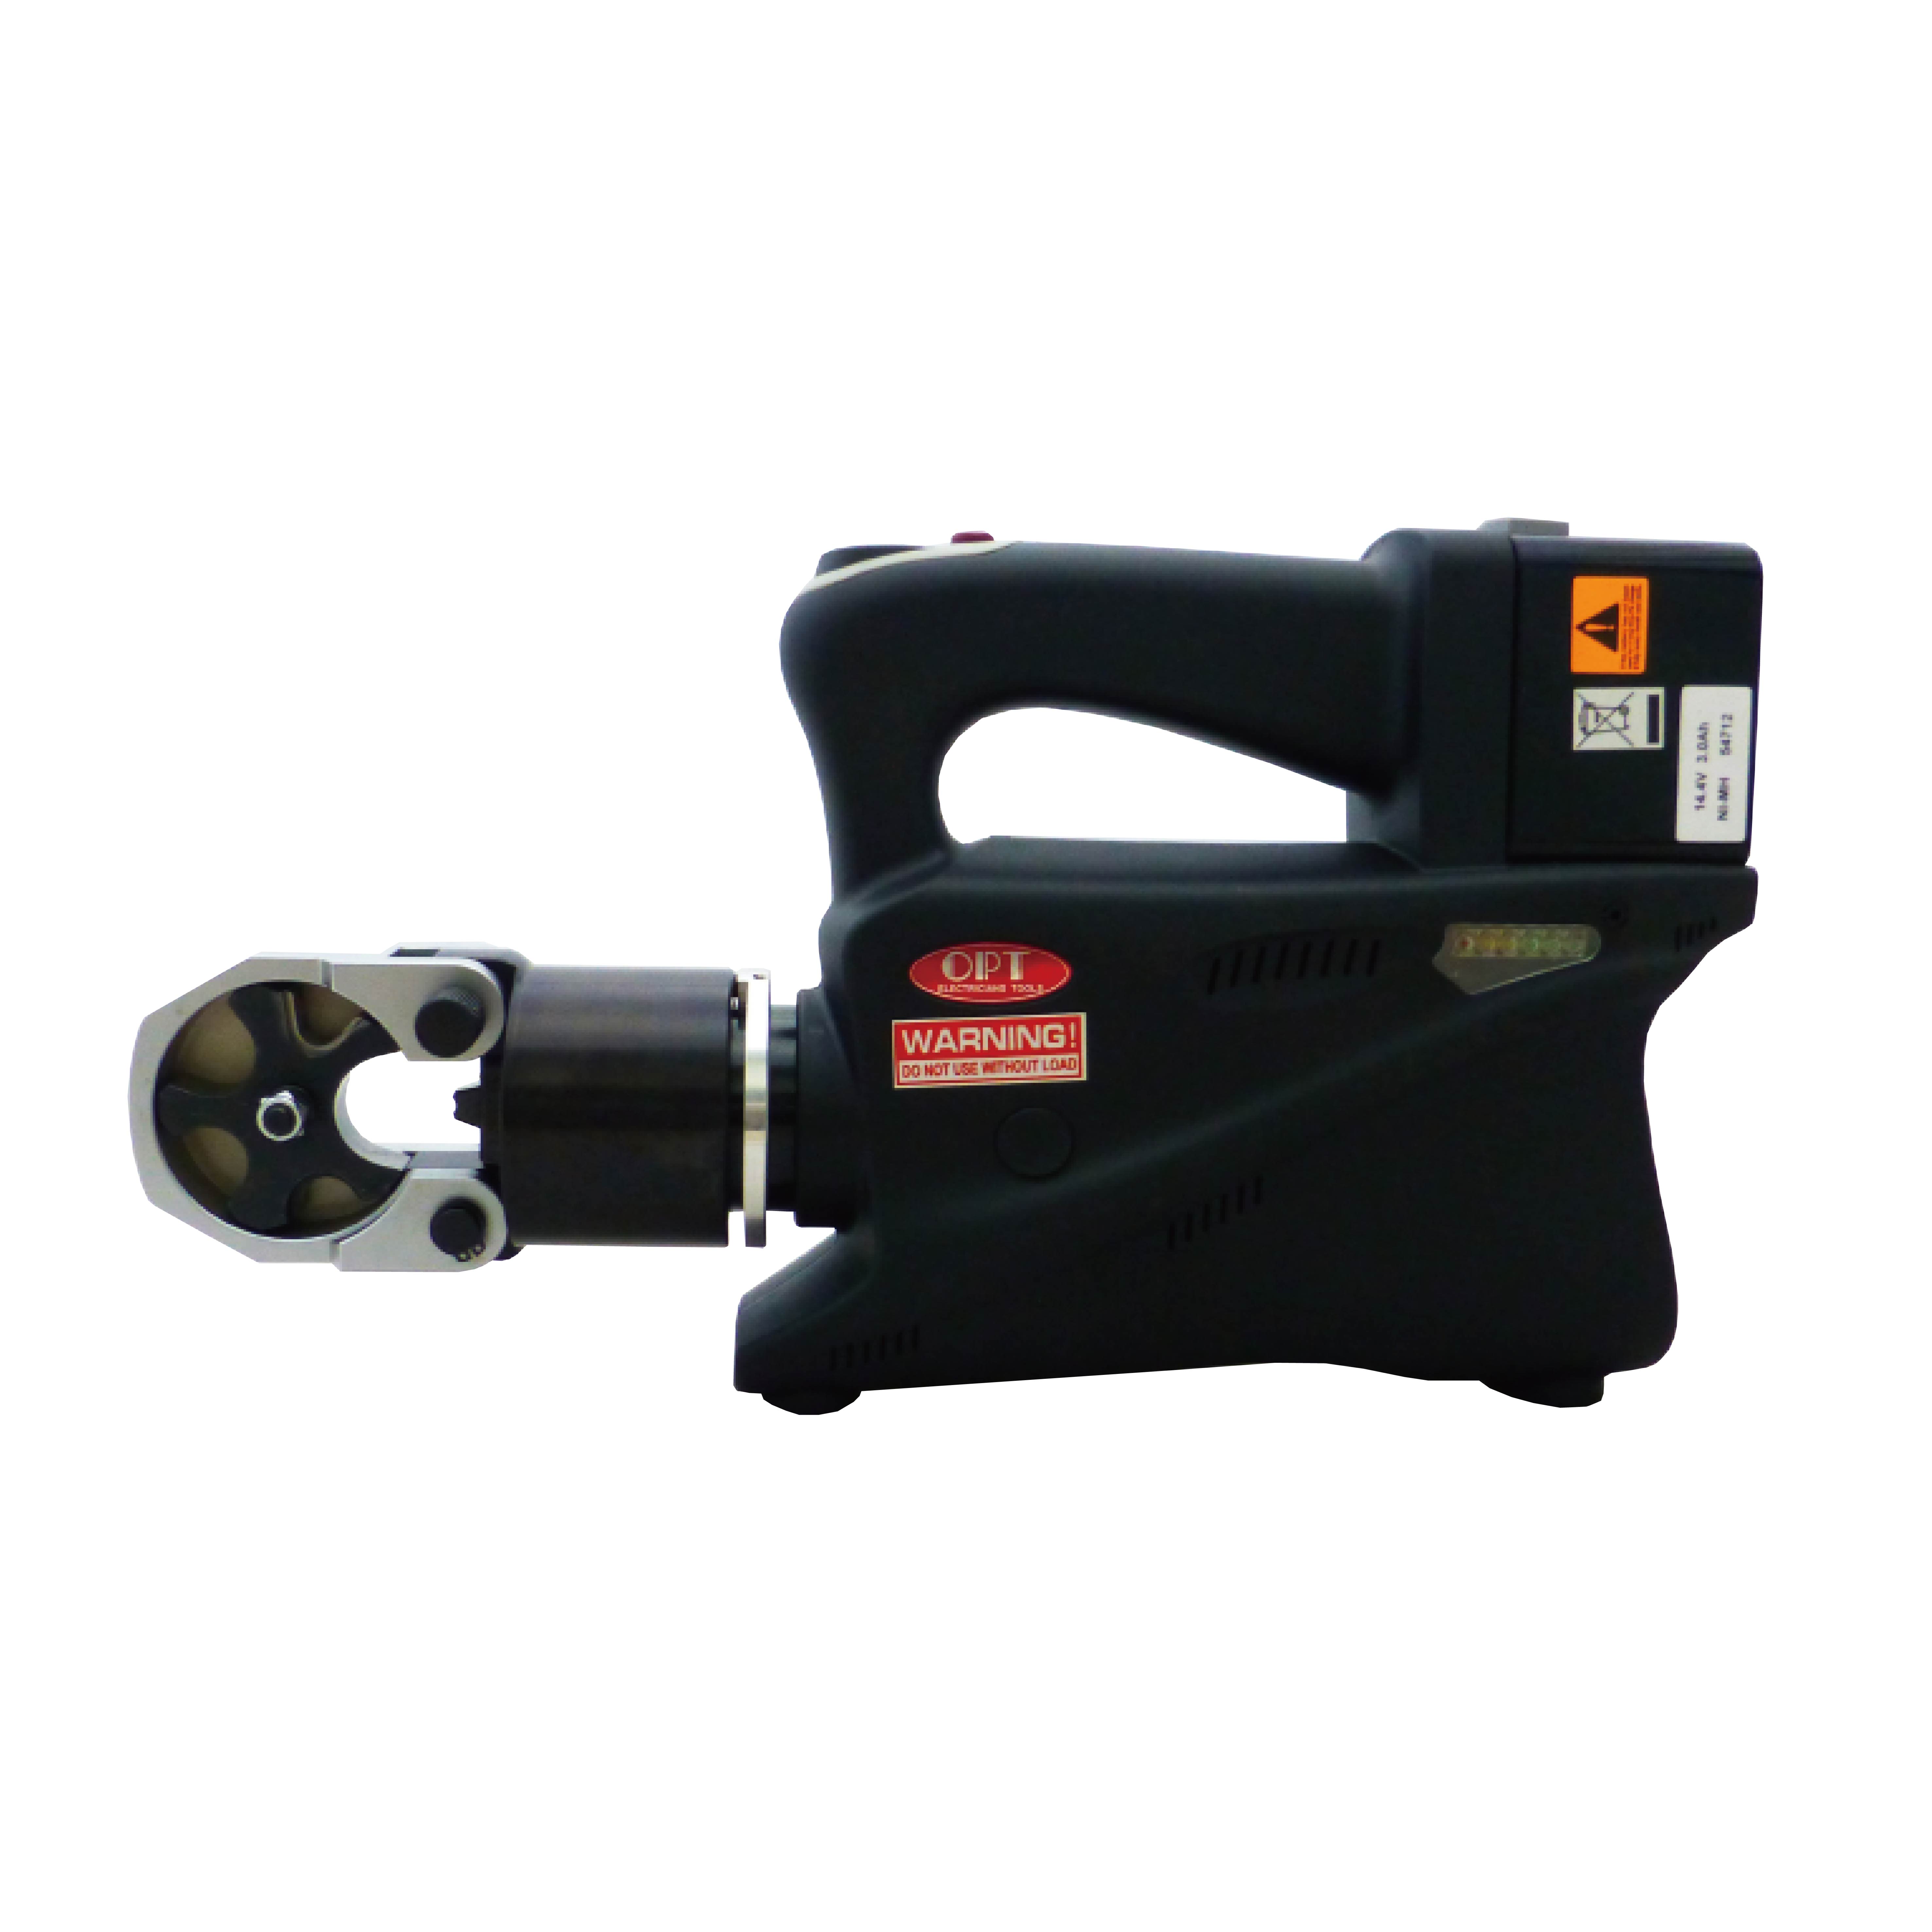 EPL-150D CORDLESS HYDRAULIC CRIMPING TOOLS-EPL-150D 